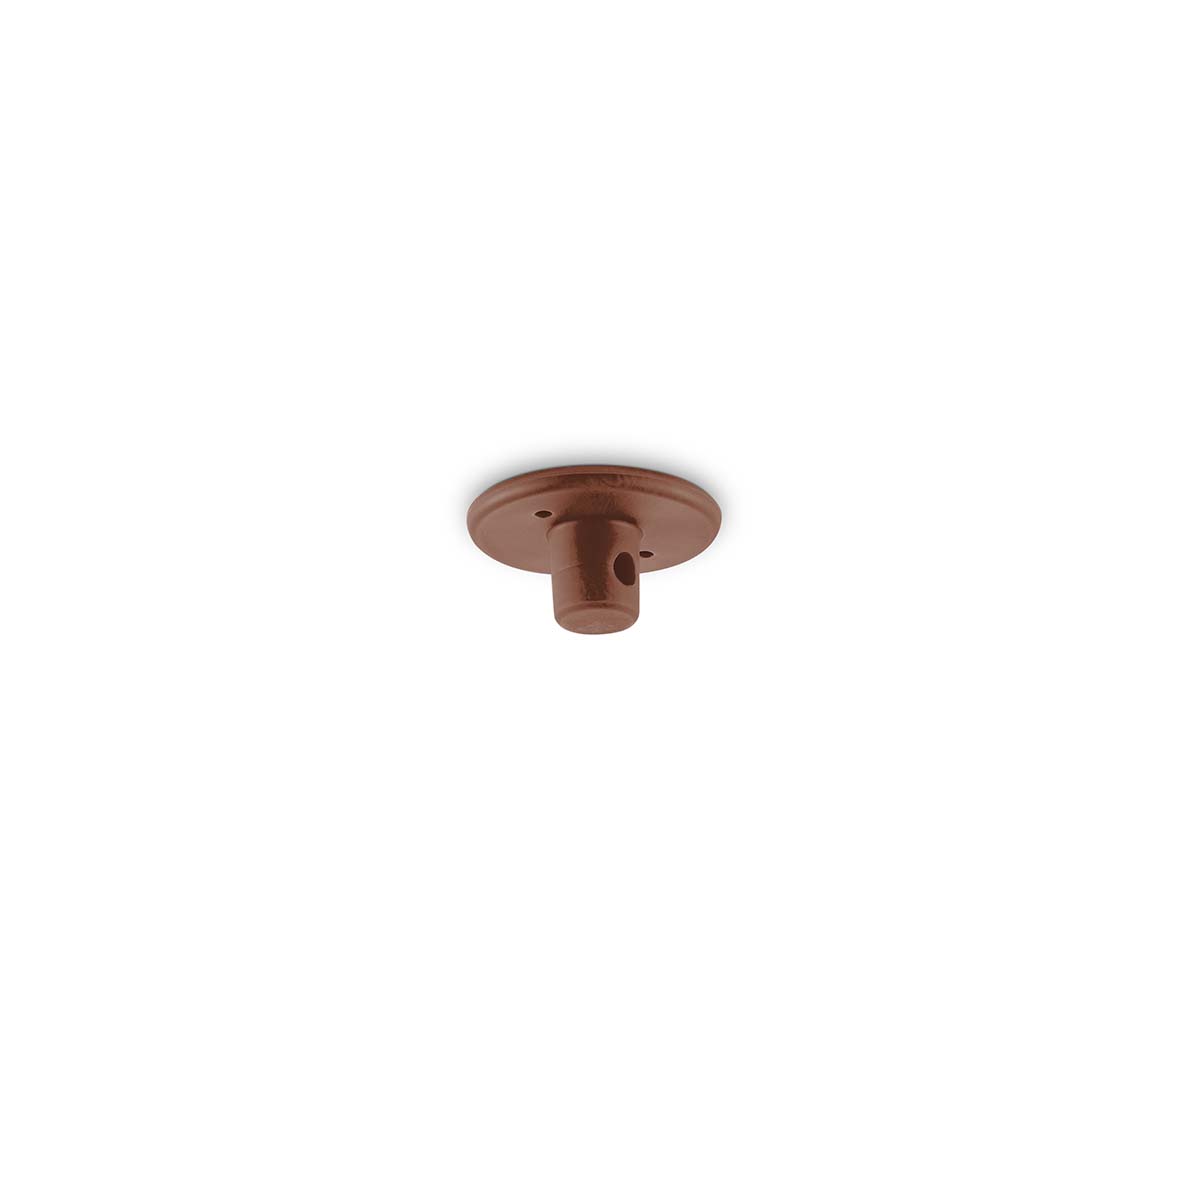 Tangla lighting - TLHG003BN - Silicone cable hanger - mix and match - brown